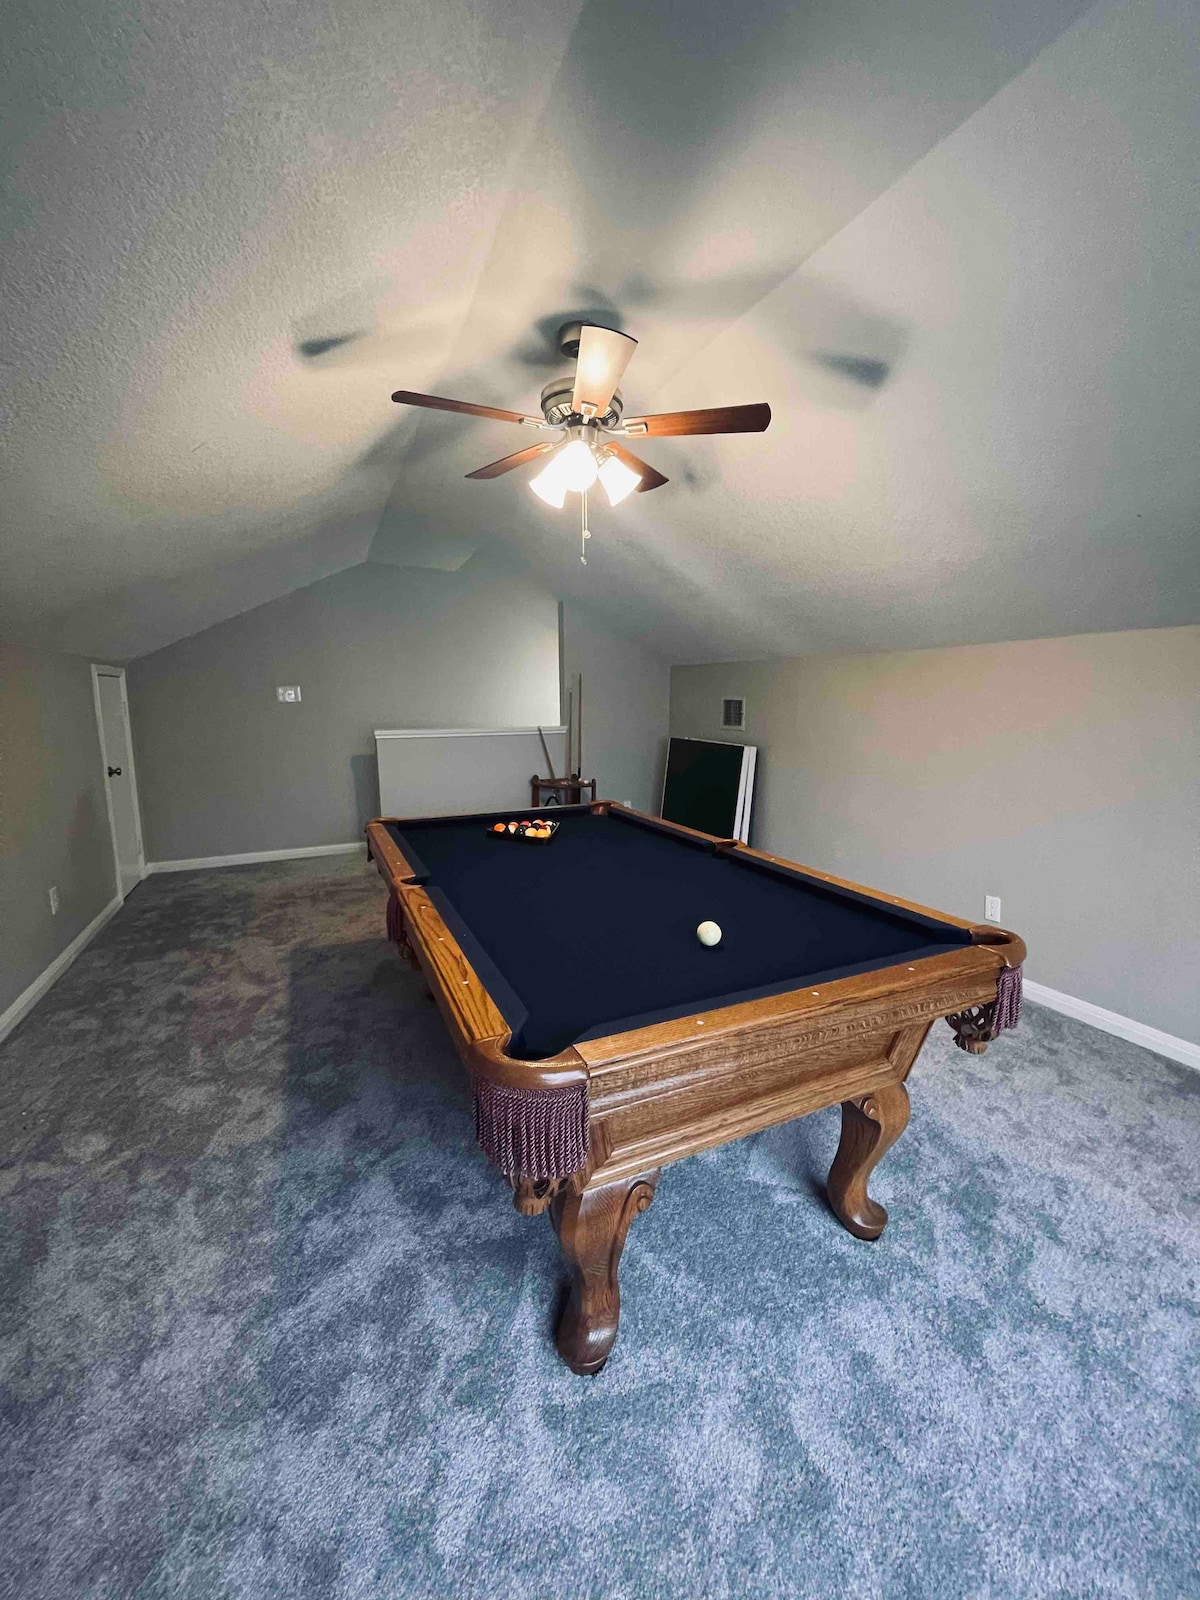 Spacious 5 bed house W/ pool table 1.5 miles to DT